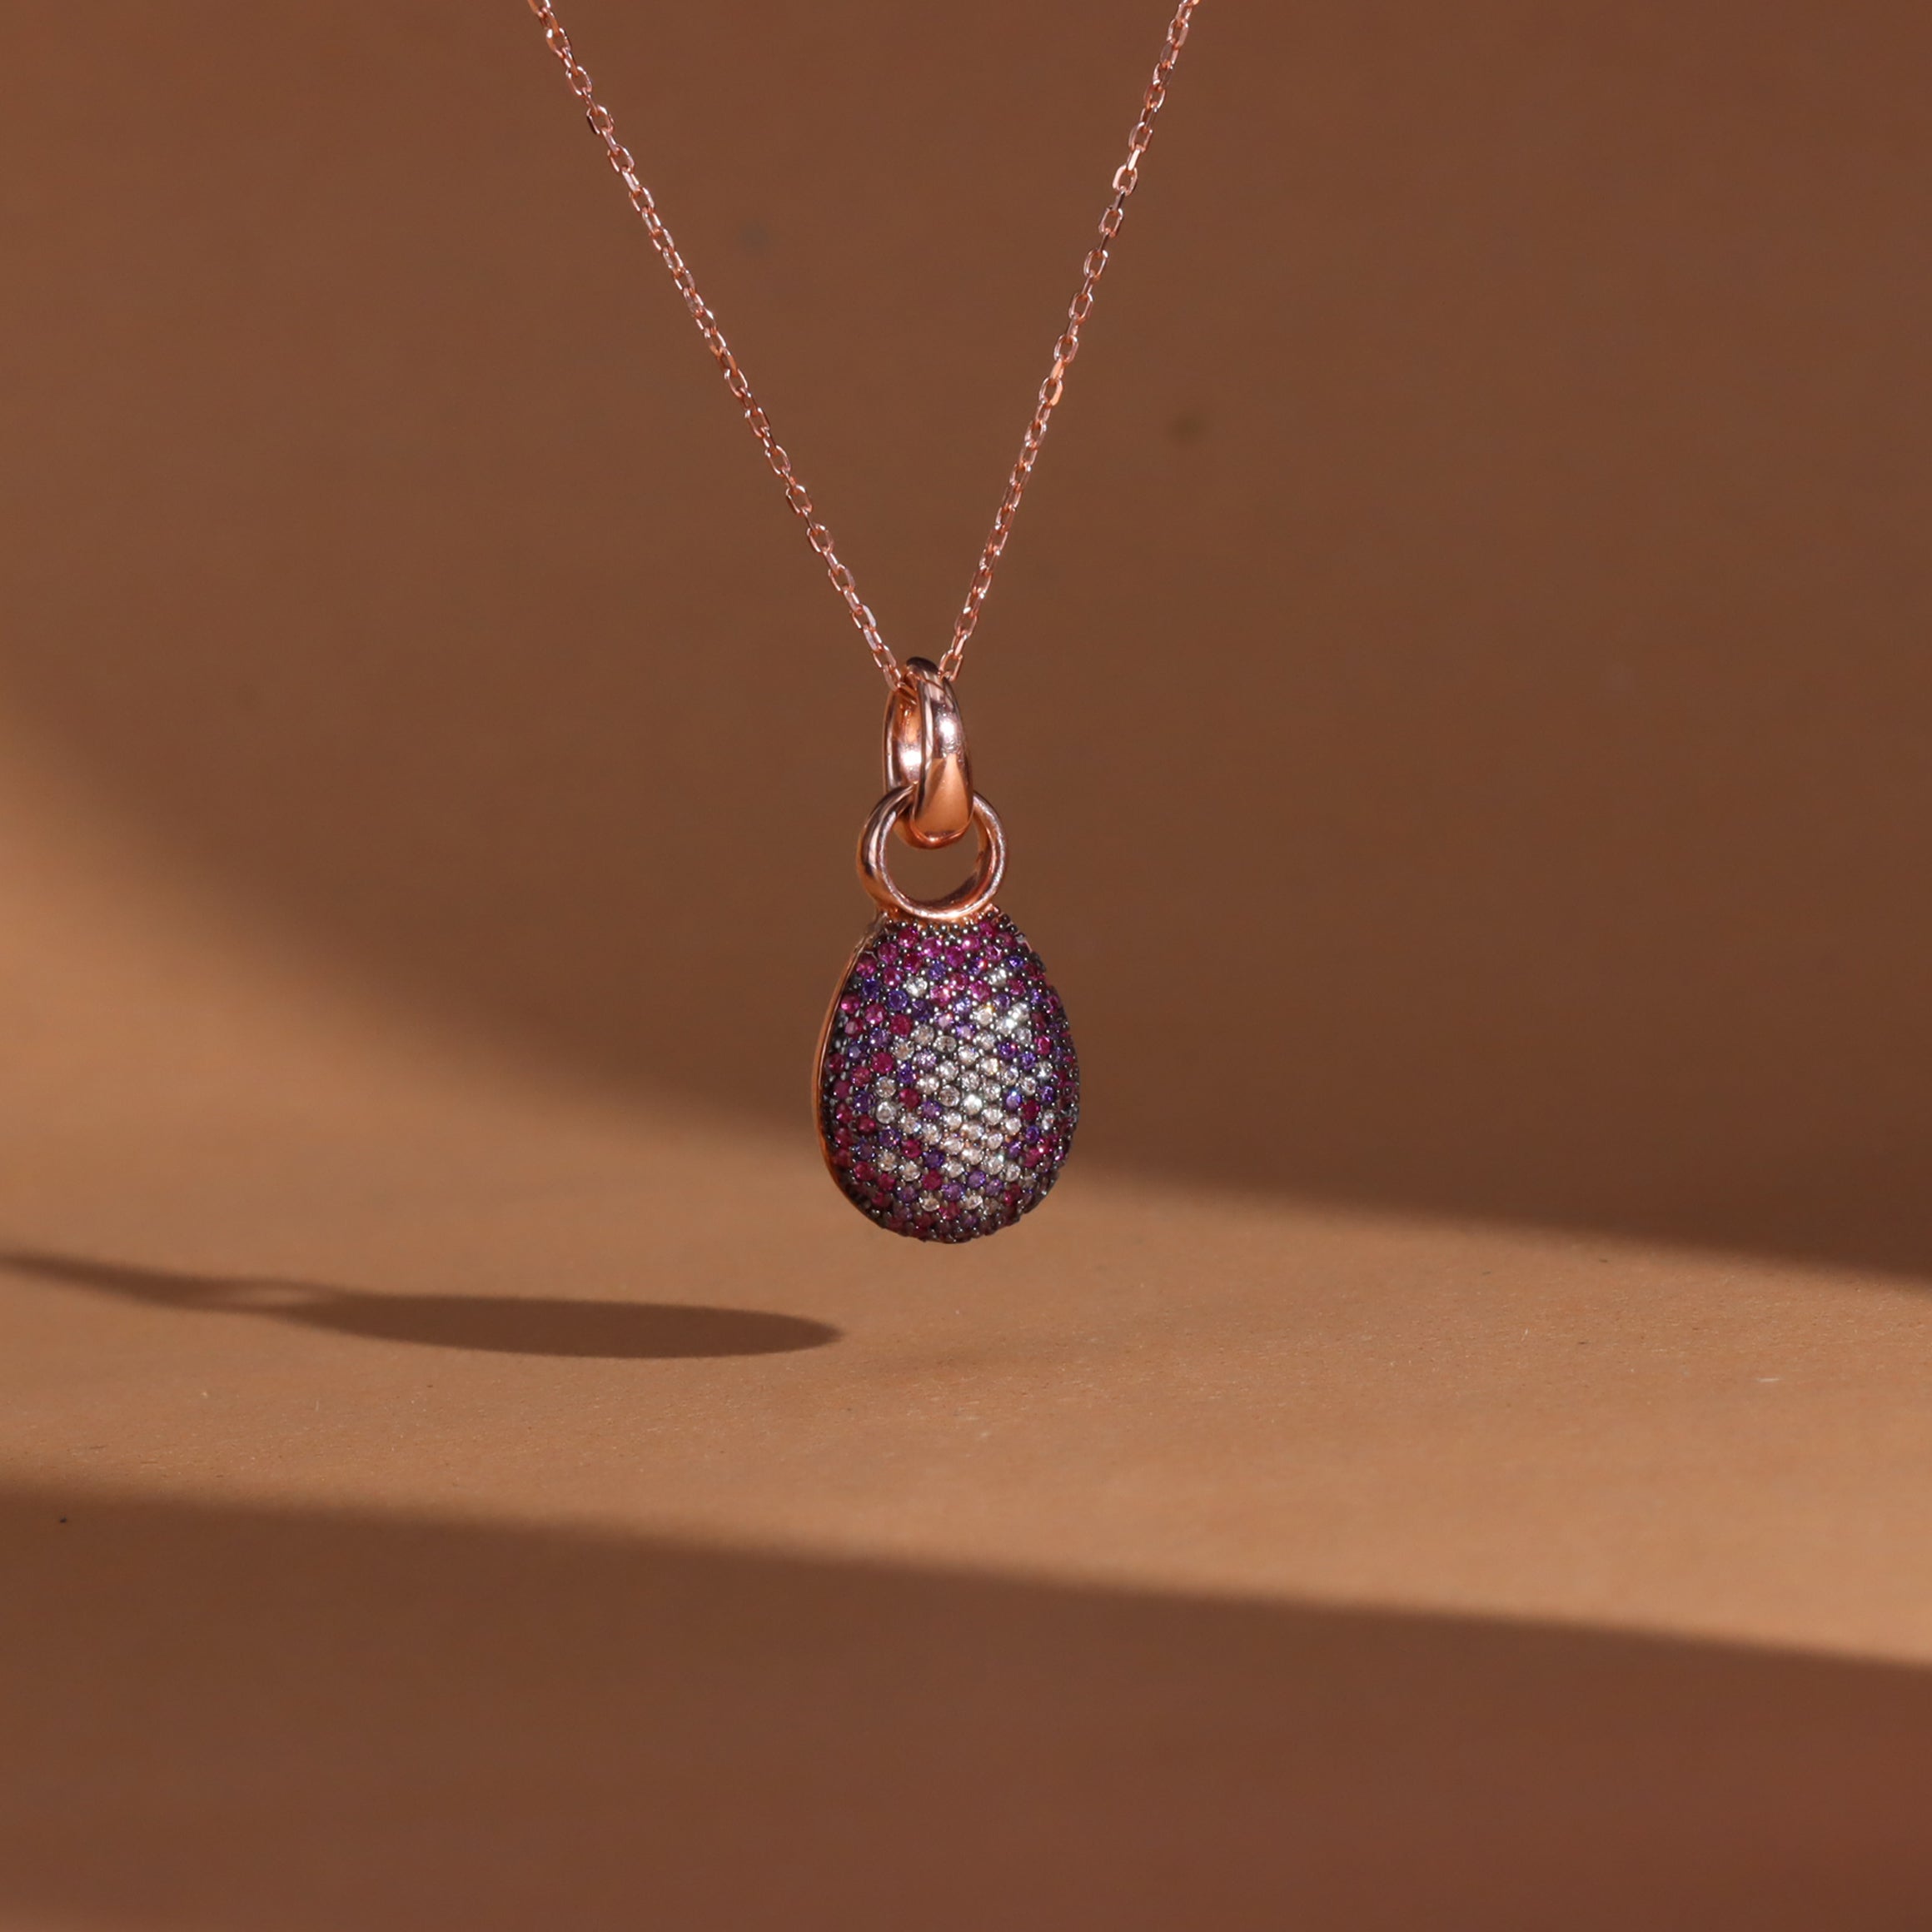 Oval shape rose gold pendant with chain